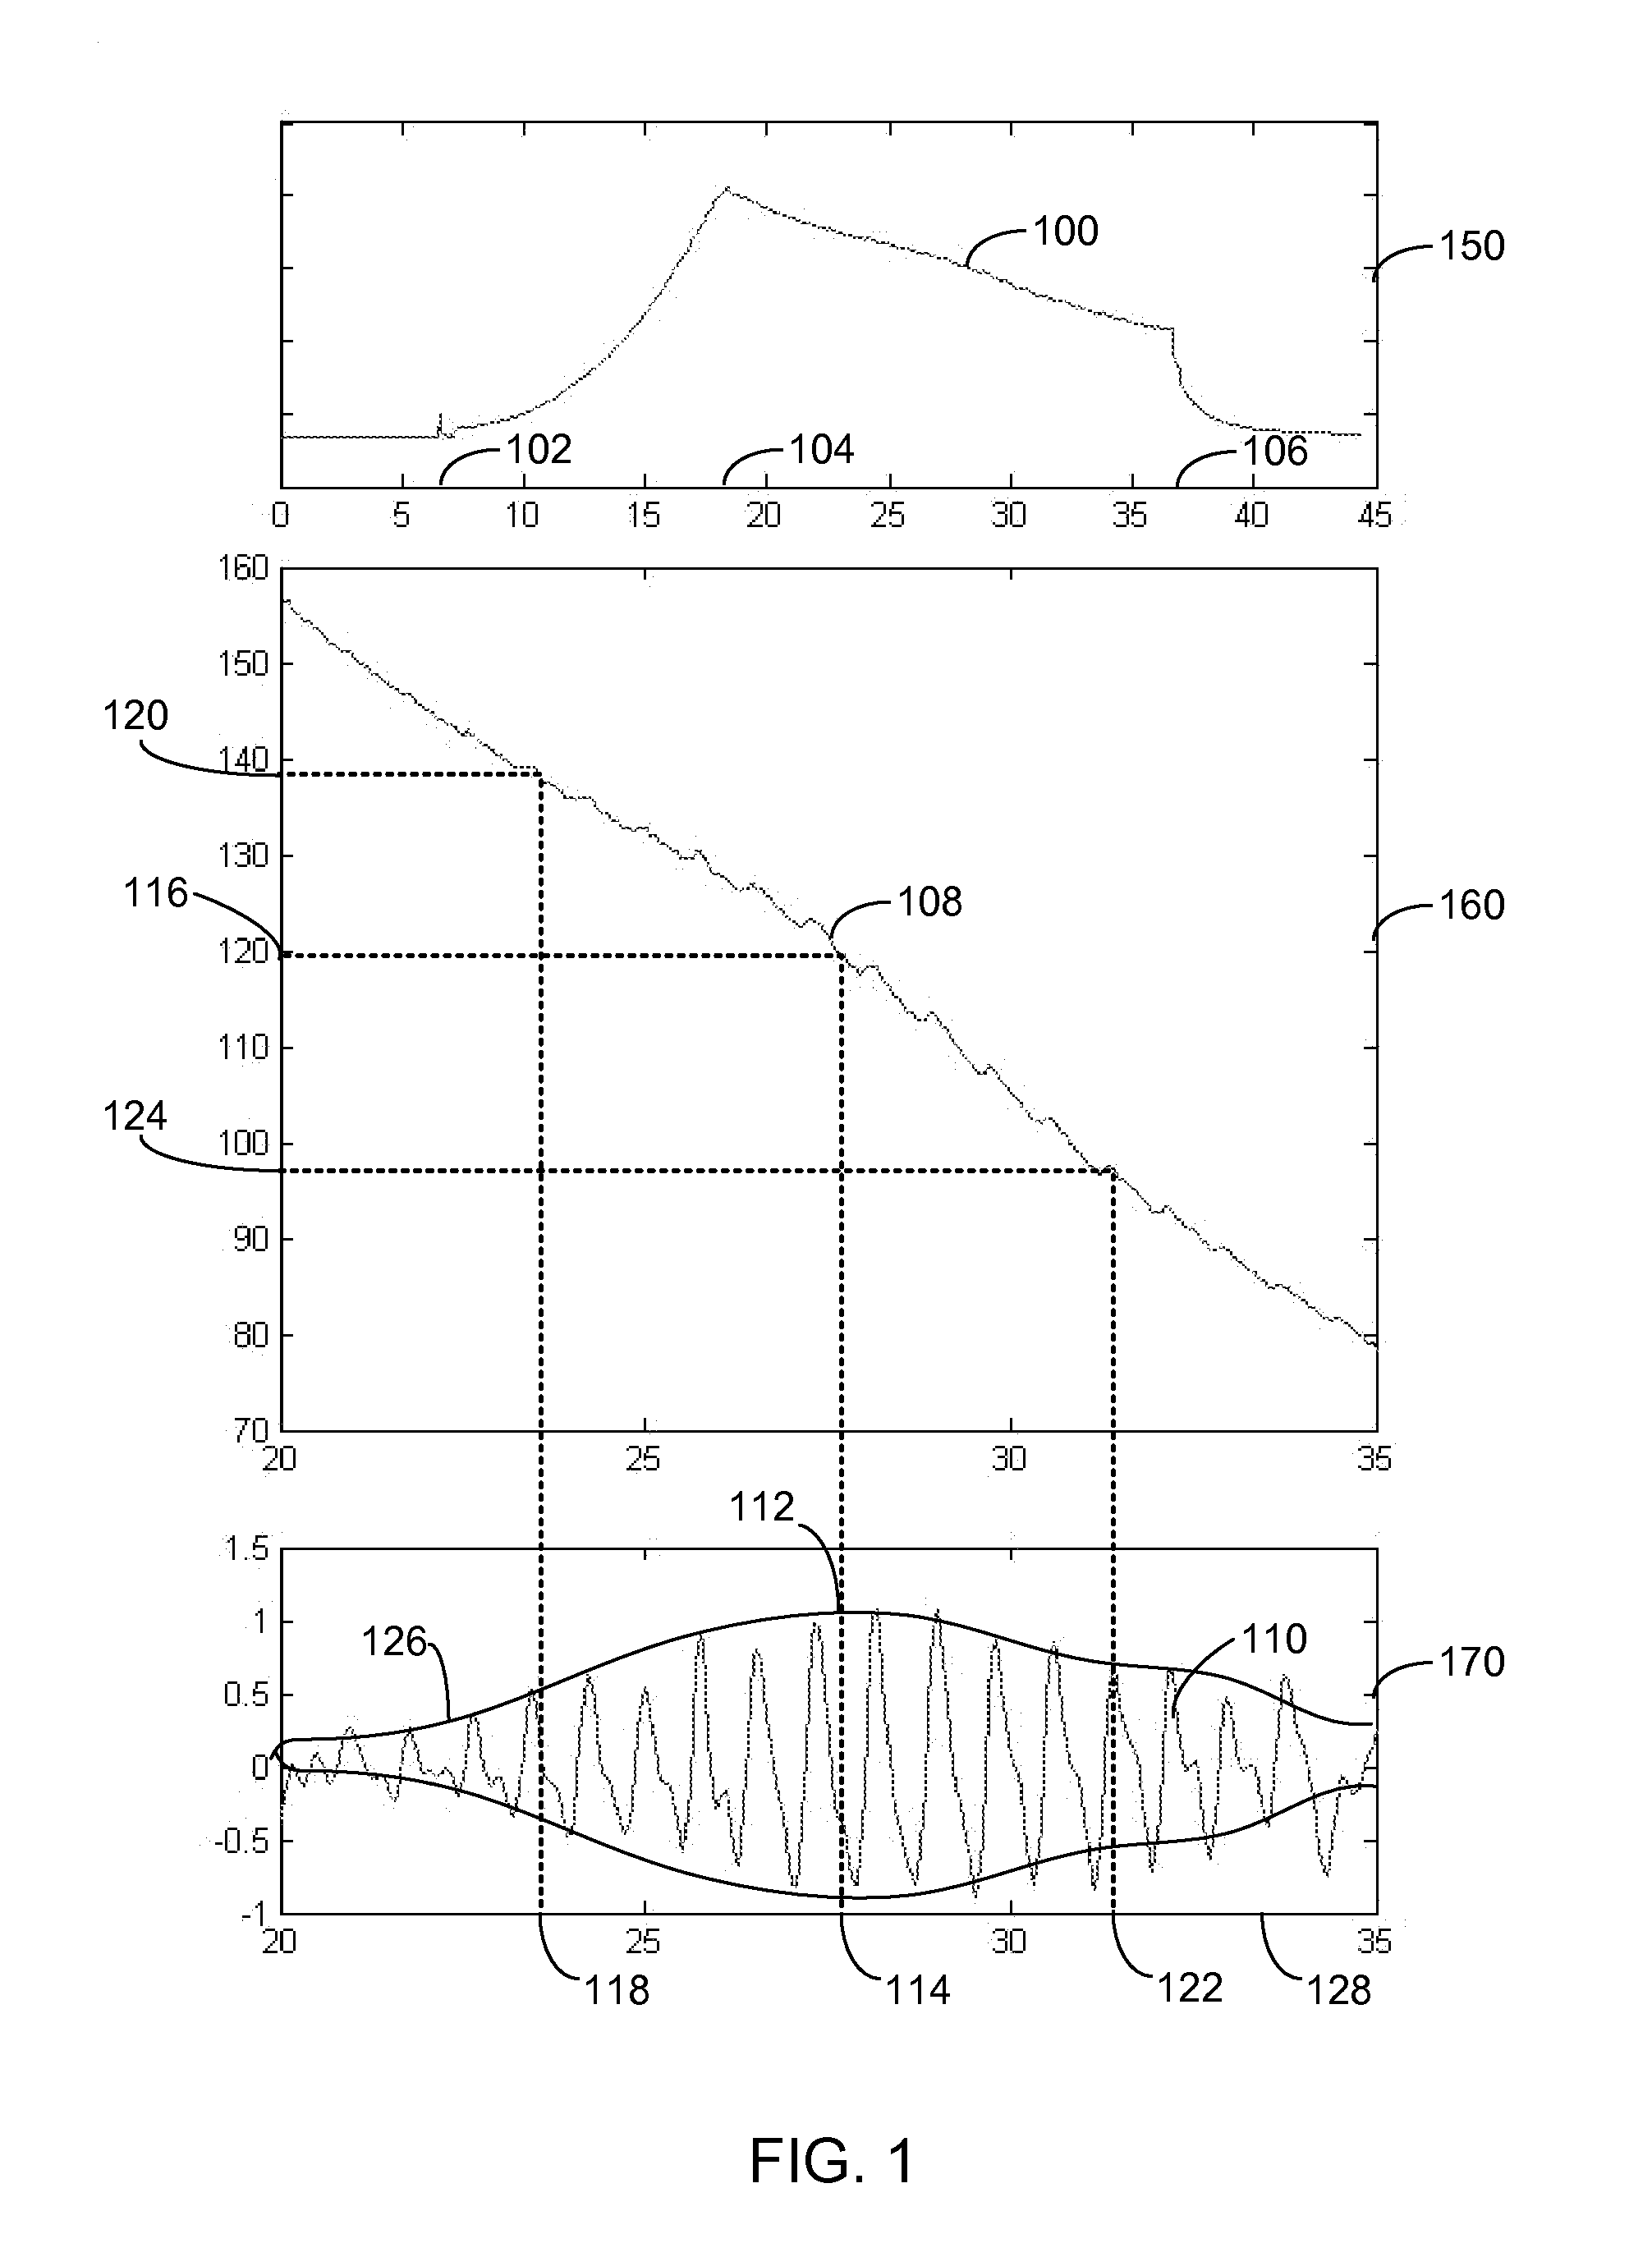 Systems and methods for non-invasive determination of blood pressure